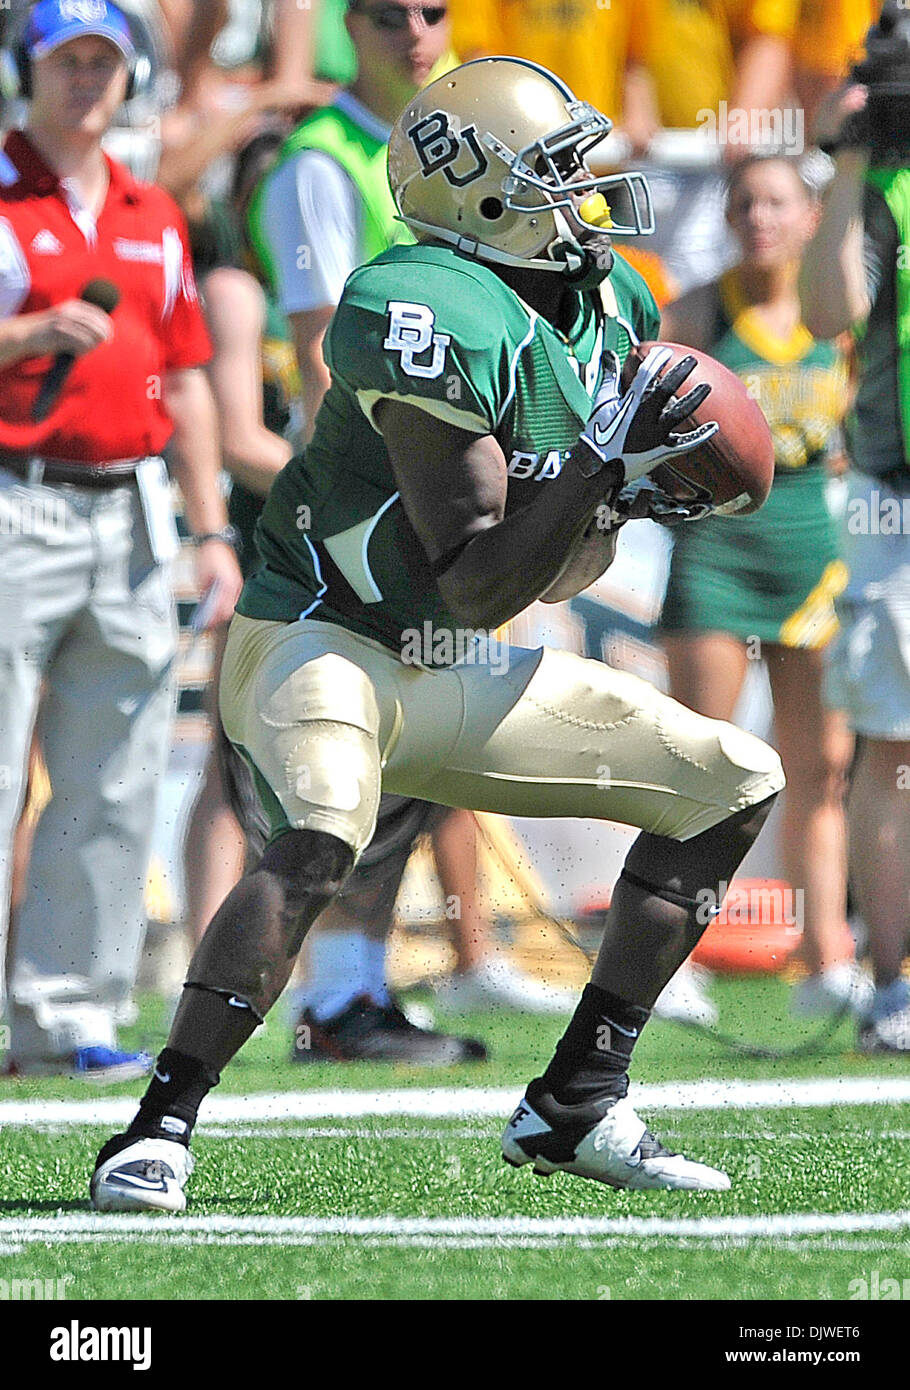 Oct. 2, 2010 - Waco, Texas, United States of America - Baylor Bears wide receiver Kendall Wright #1 makes a catch for a big gain in the fourth quarter of their game at Floyd Casey Stadium in Waco, Texas.  Baylor wins 55-7. (Credit Image: © Manny Flores/Southcreek Global/ZUMApress.com) Stock Photo